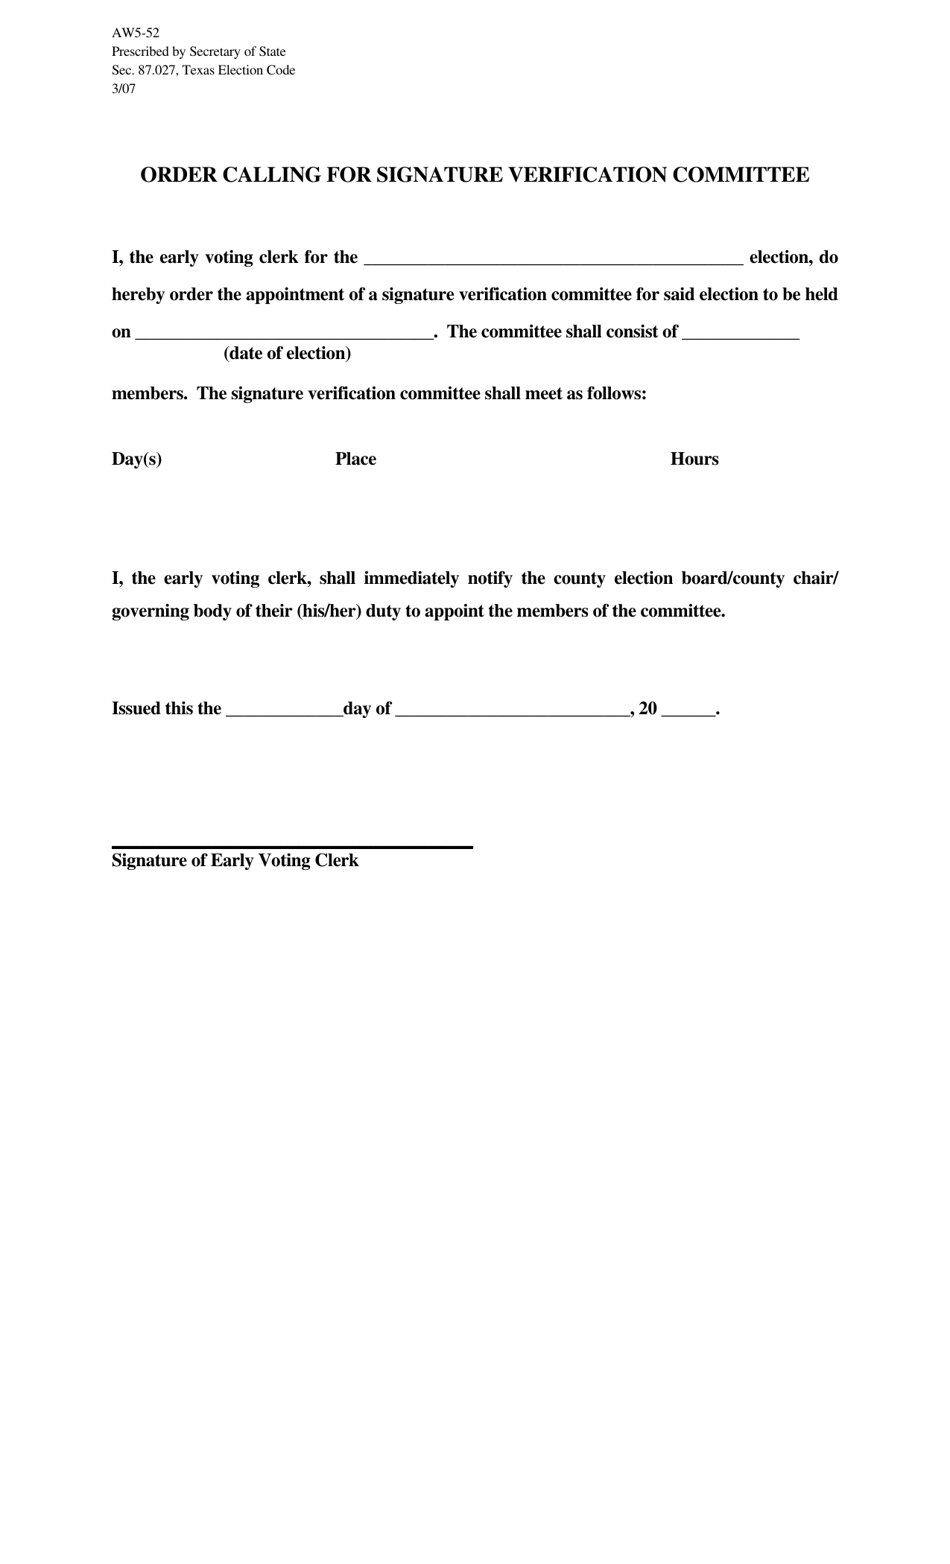 Form AW5-52 Order Calling for Signature Verification Committee - Texas, Page 1